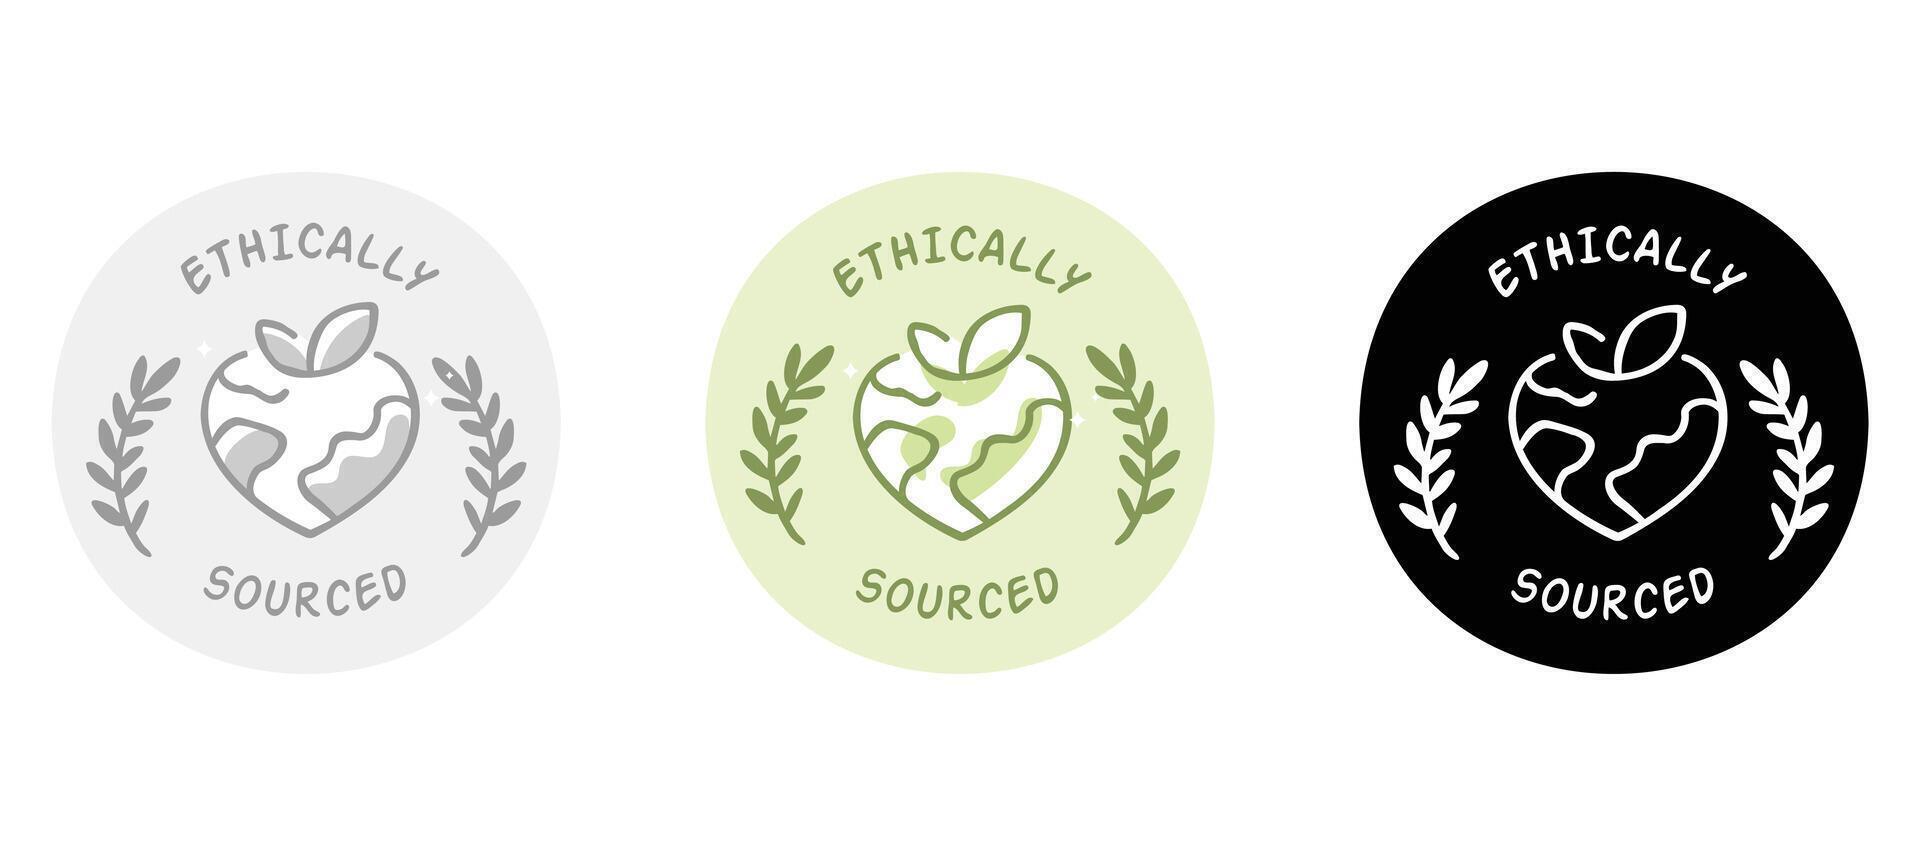 Ethically Sourced Icon. This icon represents products or materials